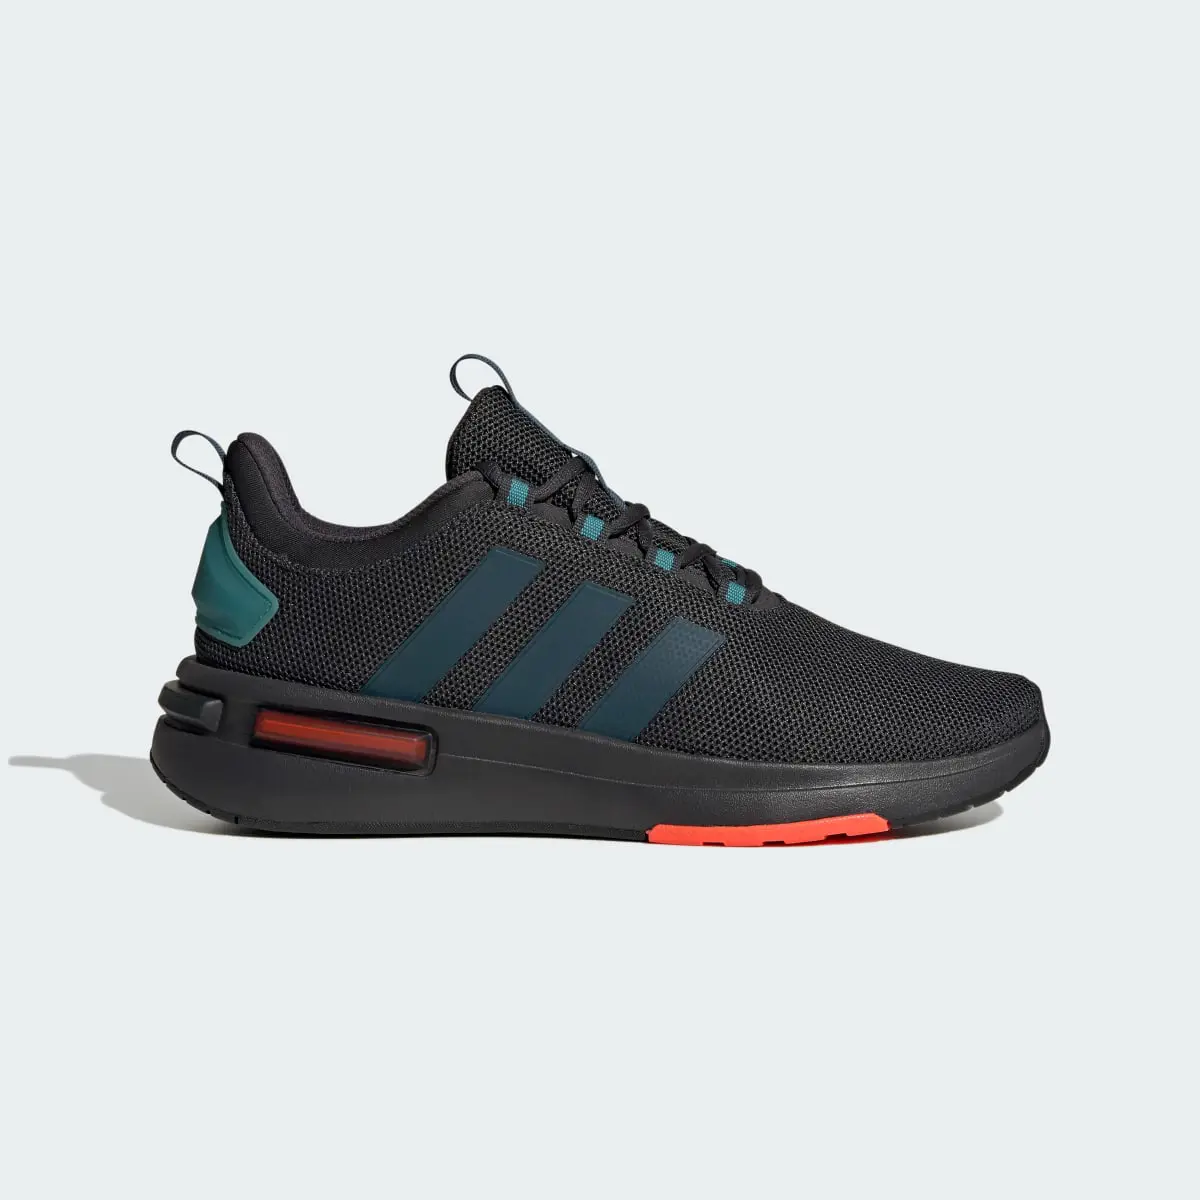 Adidas Racer TR23 Shoes. 2